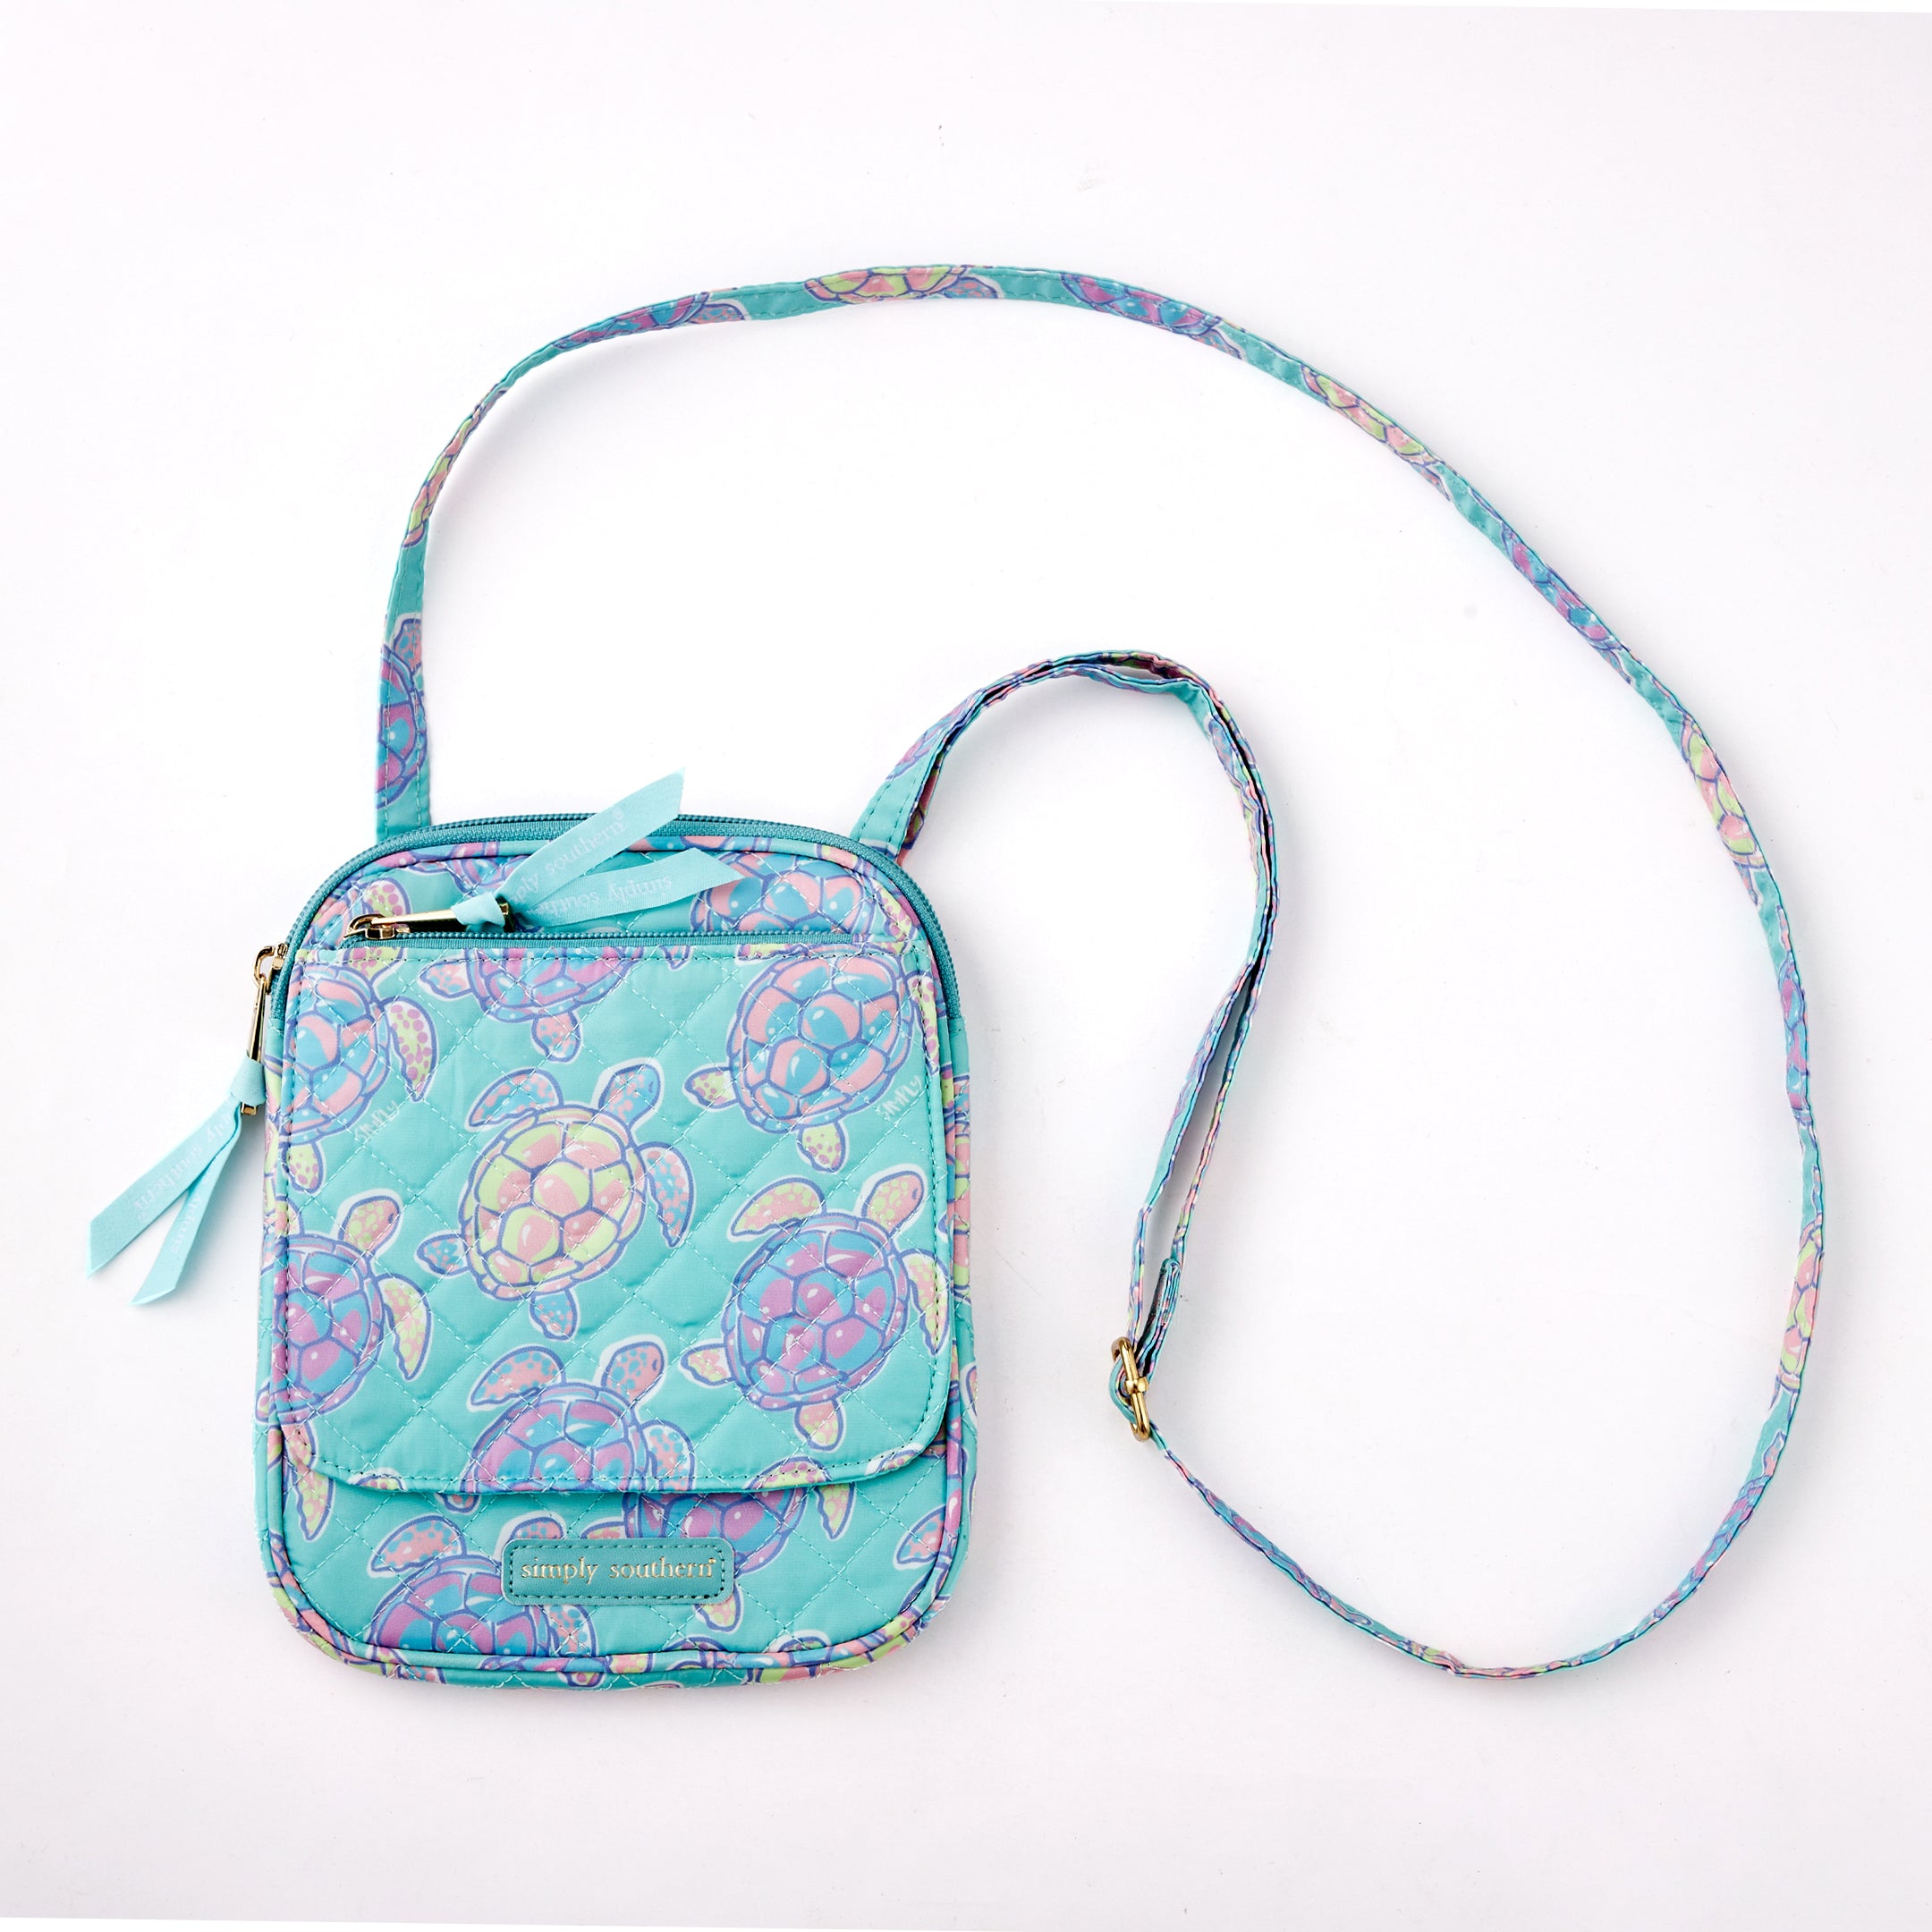 Simply Southern Quilted Backpack for Women in Sea Turtle